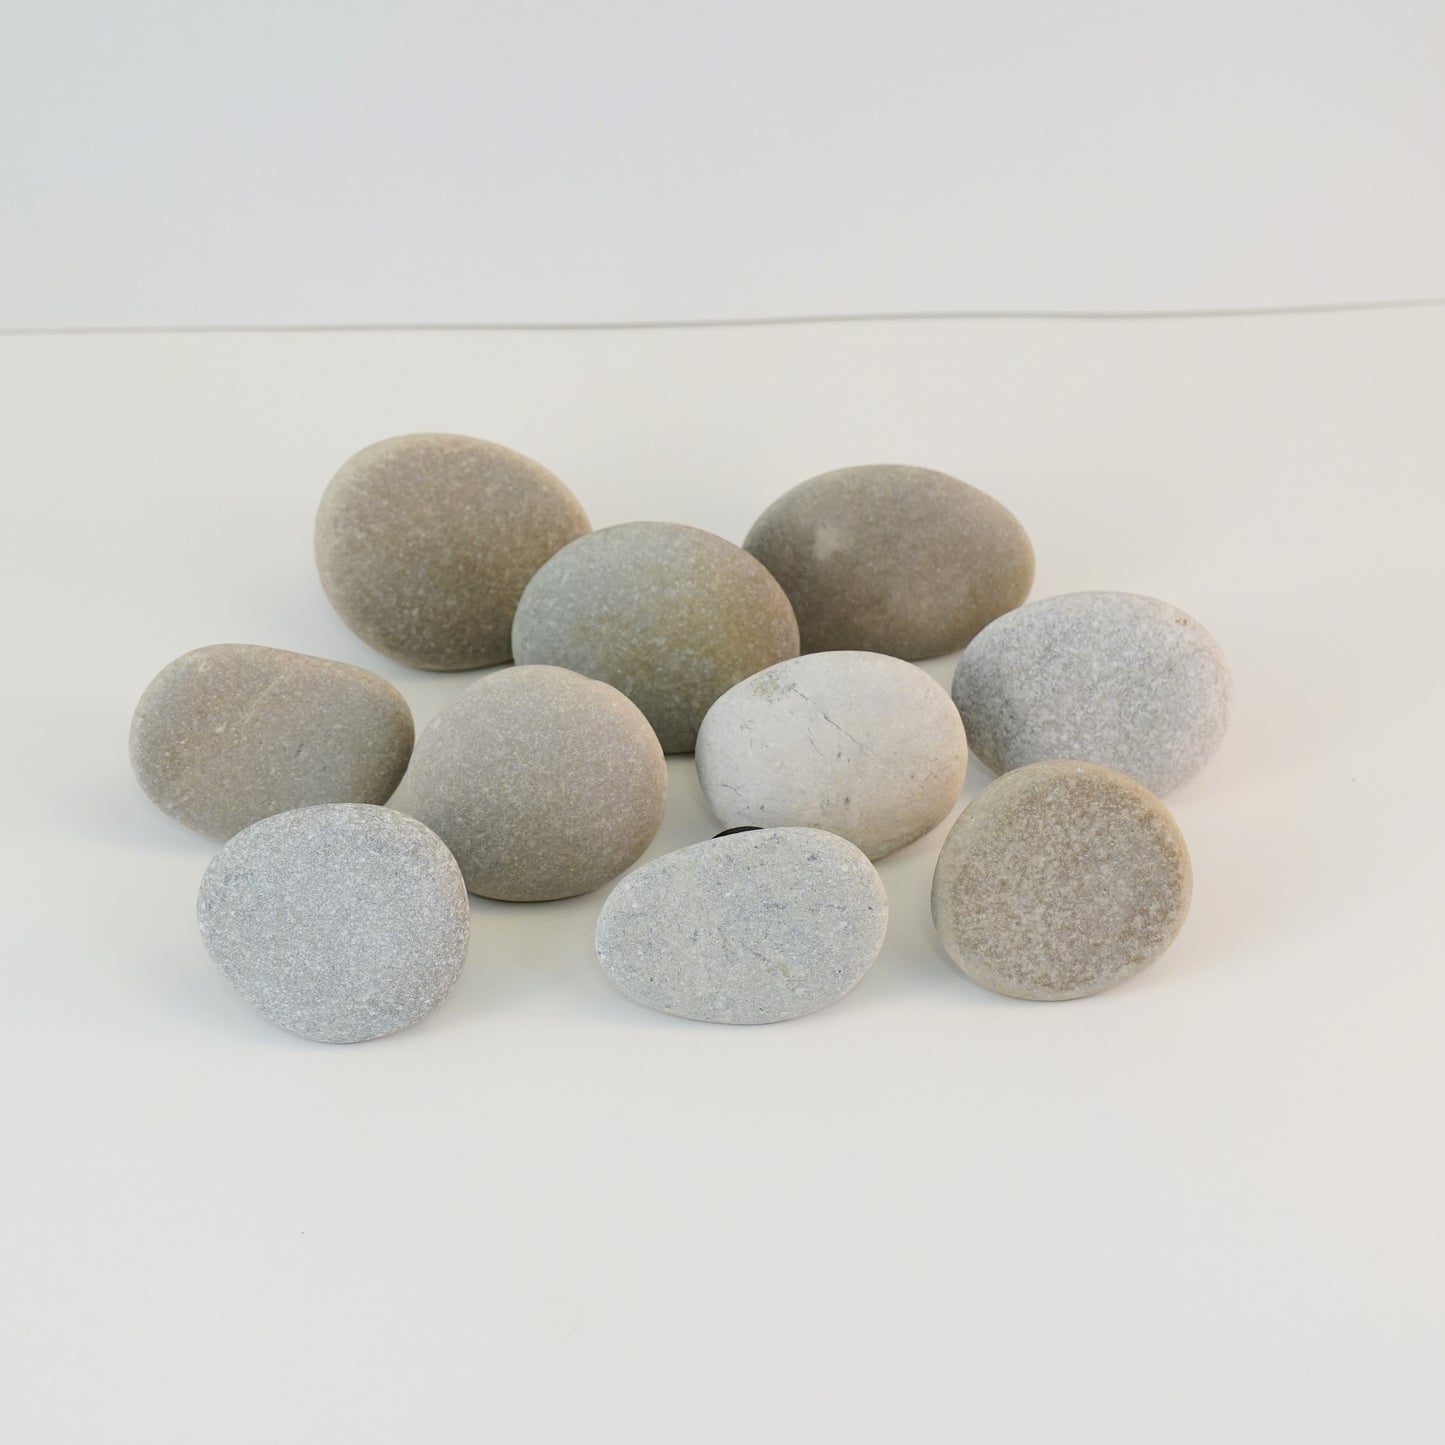 Beach Rock Stone Pebble Cabinet Knobs Cabinet Hardware - Set of 10 - Ready to Ship